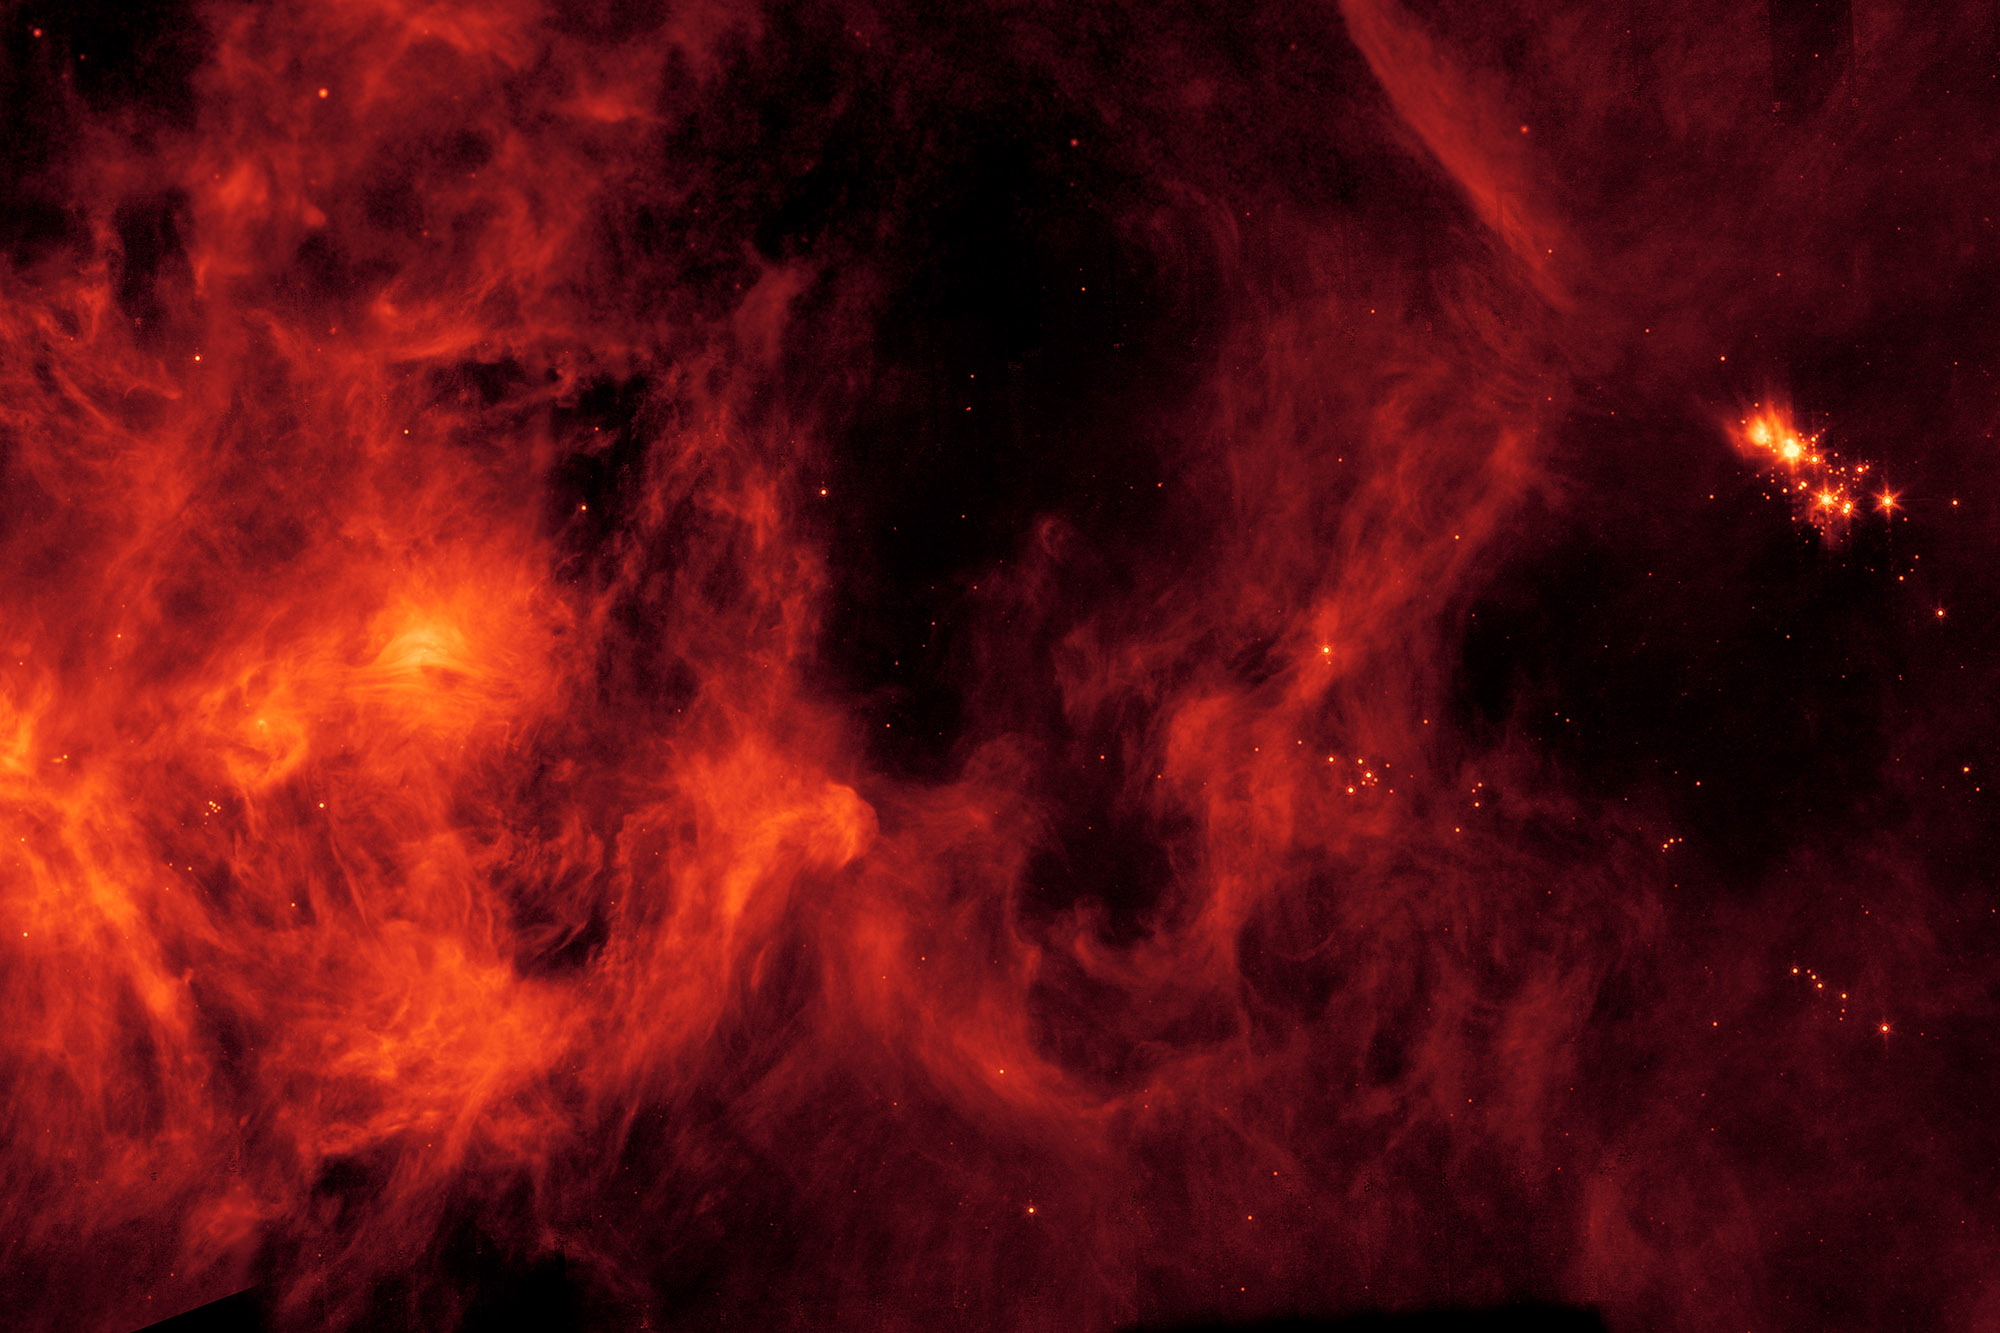 A collection of red gas and dust in space